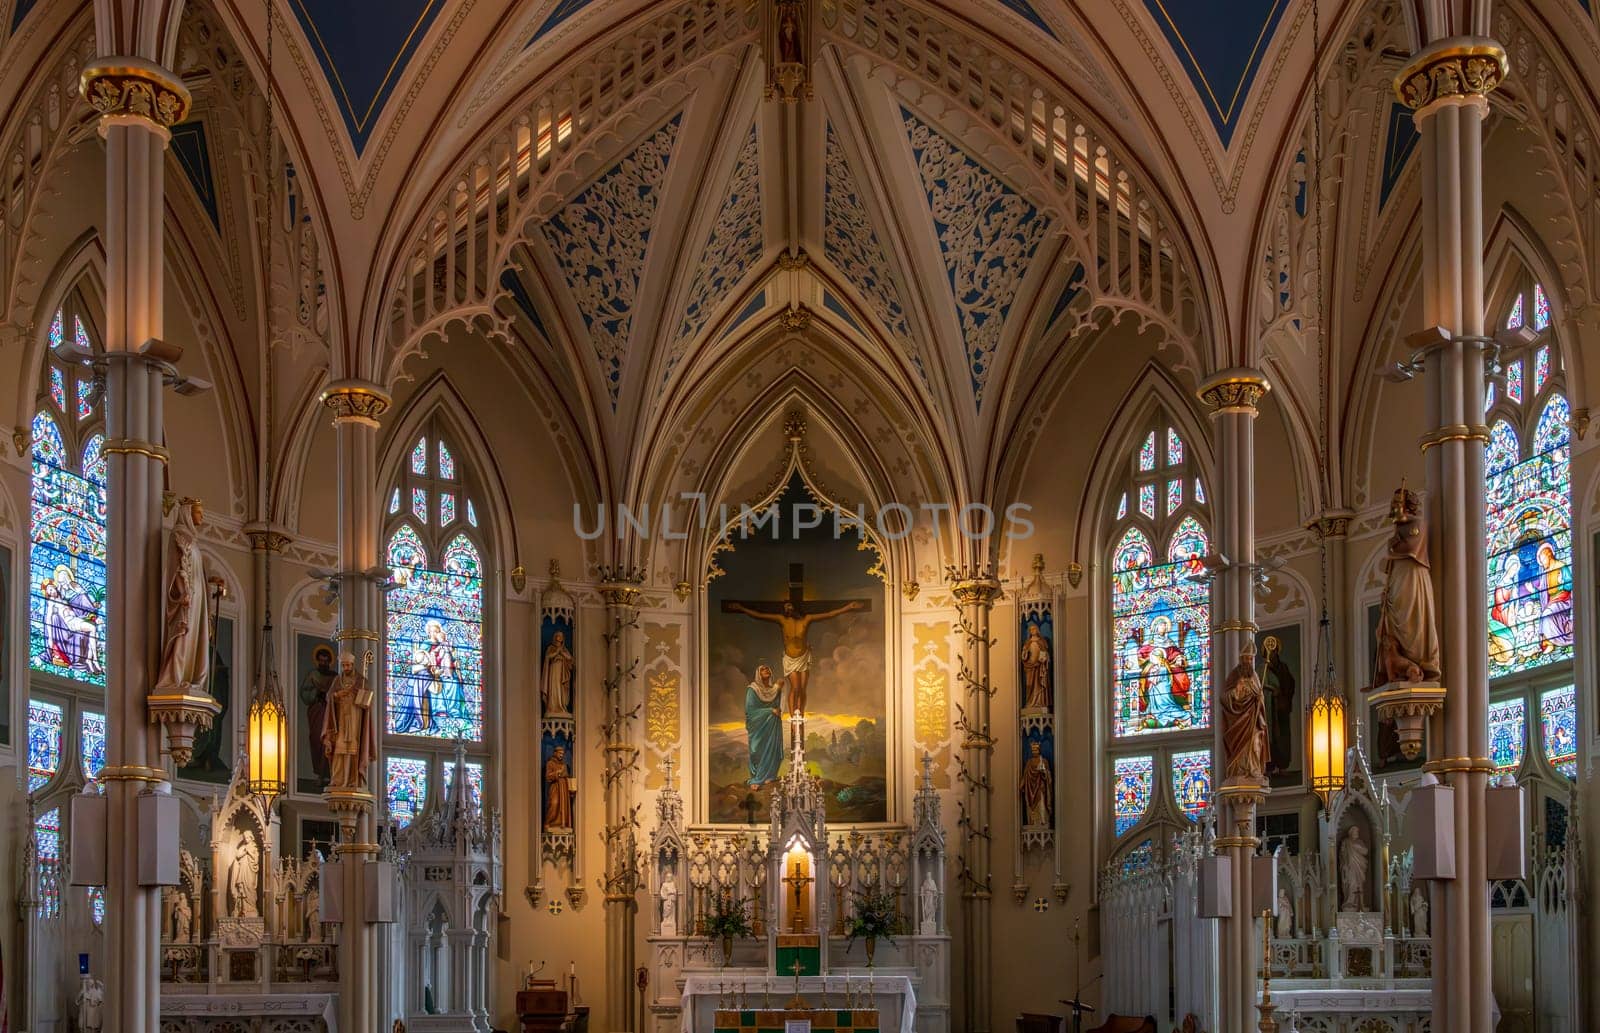 Ornate windows and ceiling of St Mary Basilica in Natchez in Mississippi by steheap